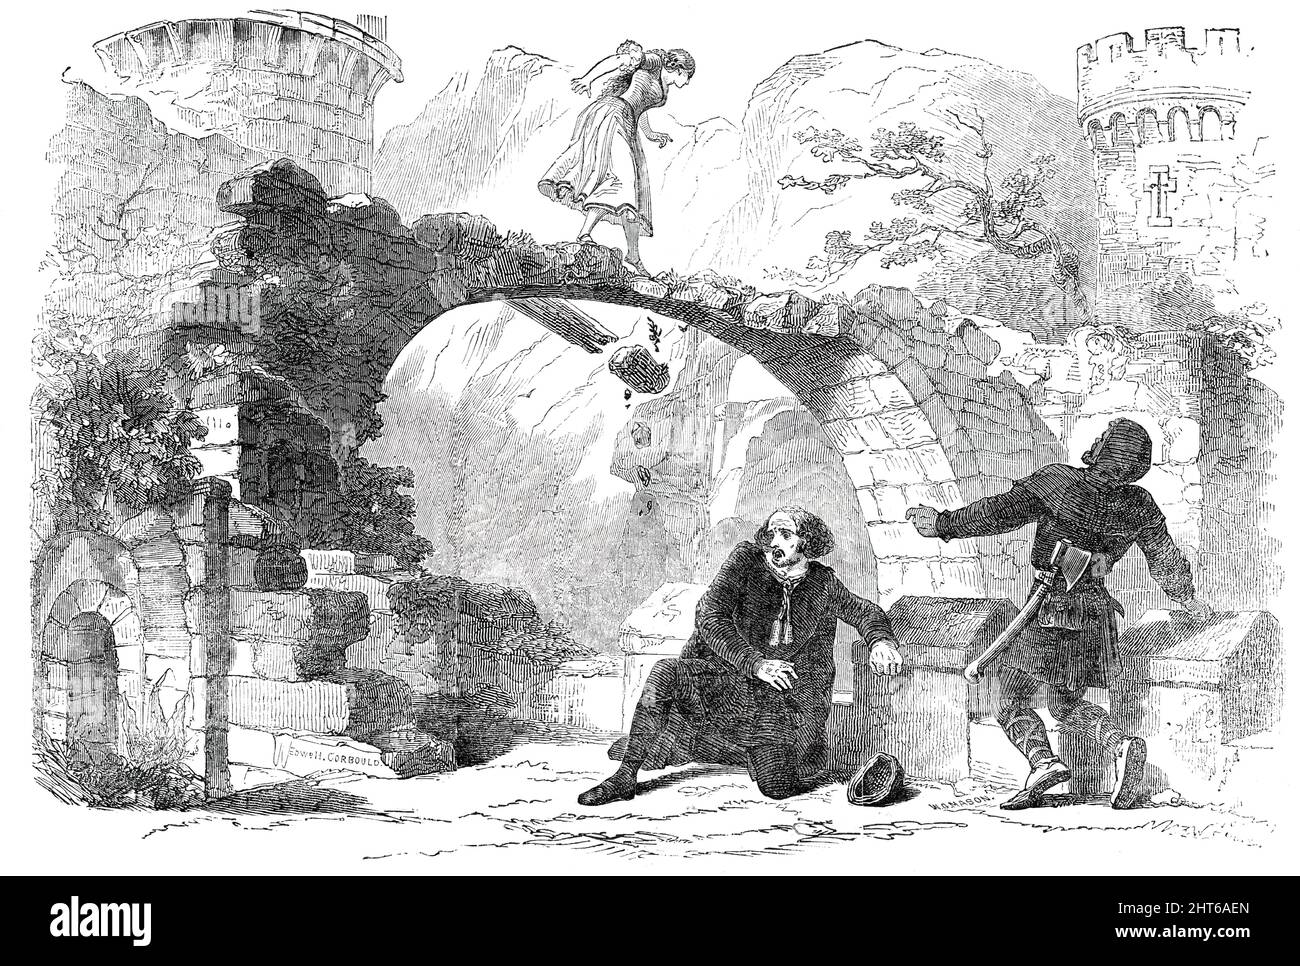 Scene from the New Play of &quot;The Templar&quot;, at the Princess' Theatre, [London], 1850. 'Mr. Kean, with unwonted generosity, resigned the part of the hero to Mr. Belton, a young and rising actor; assuming to himself a second role...Such noble conduct as this will ensure the success of the theatre, as well as of the dramas entrusted to its stage. Mr. Kean's acting in La Marche was indeed powerful and natural...Mrs. Kean, in Isoline, moreover, was an exceedingly picturesque representation of the pure-minded and innocent maiden, with a heart of nobleness and a soul capable of sublime devoti Stock Photo